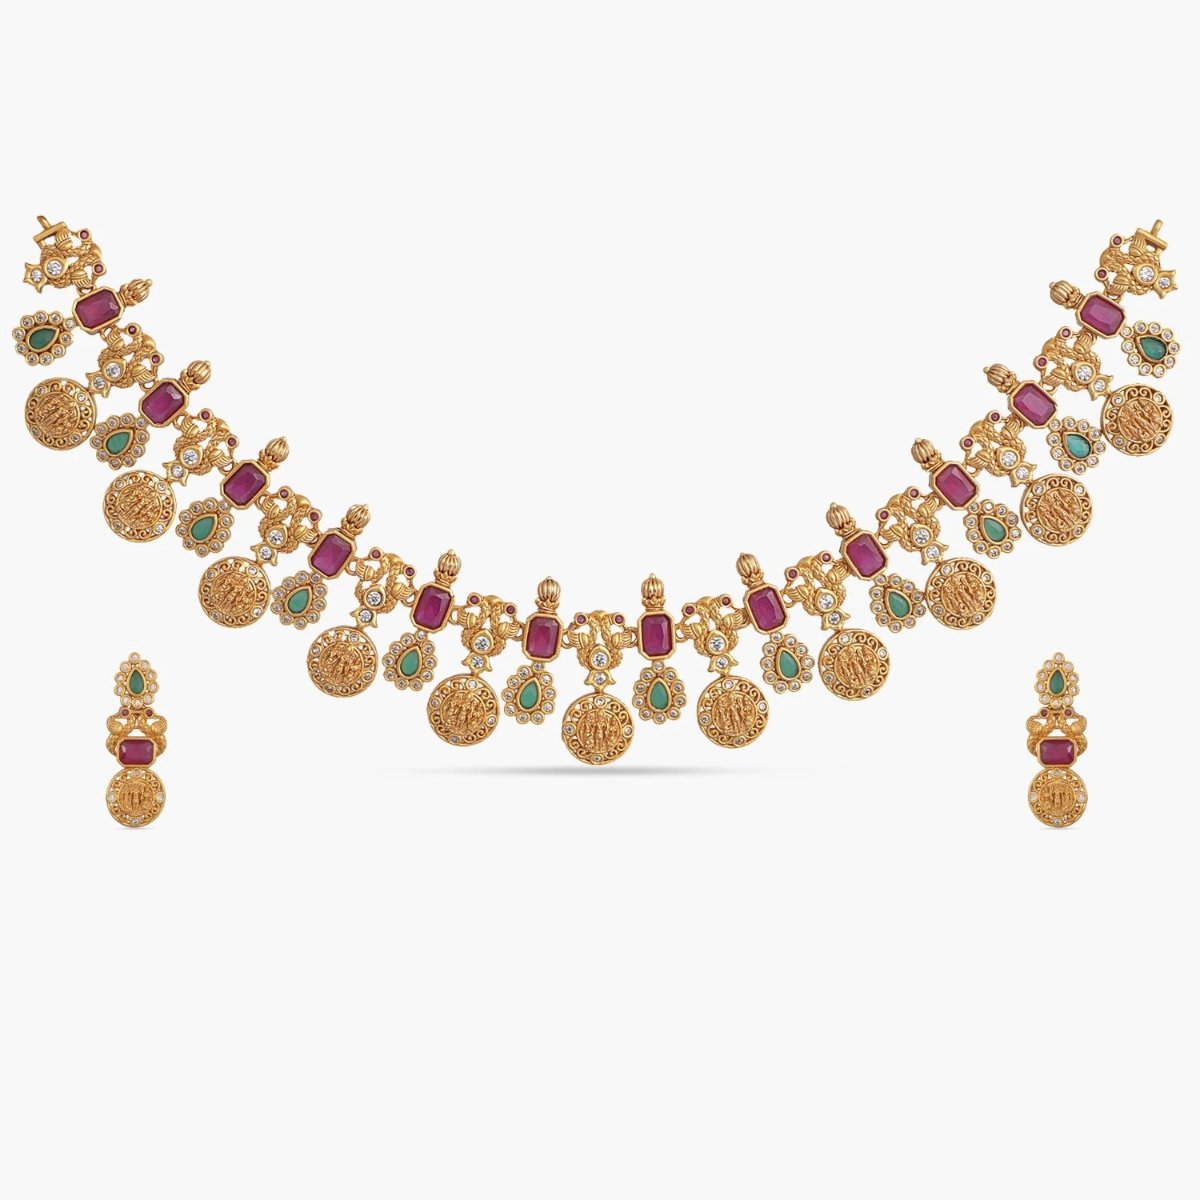 A picture of an Indian artificial necklace and earring set. The set is gold-toned with floral designs and green gemstones.